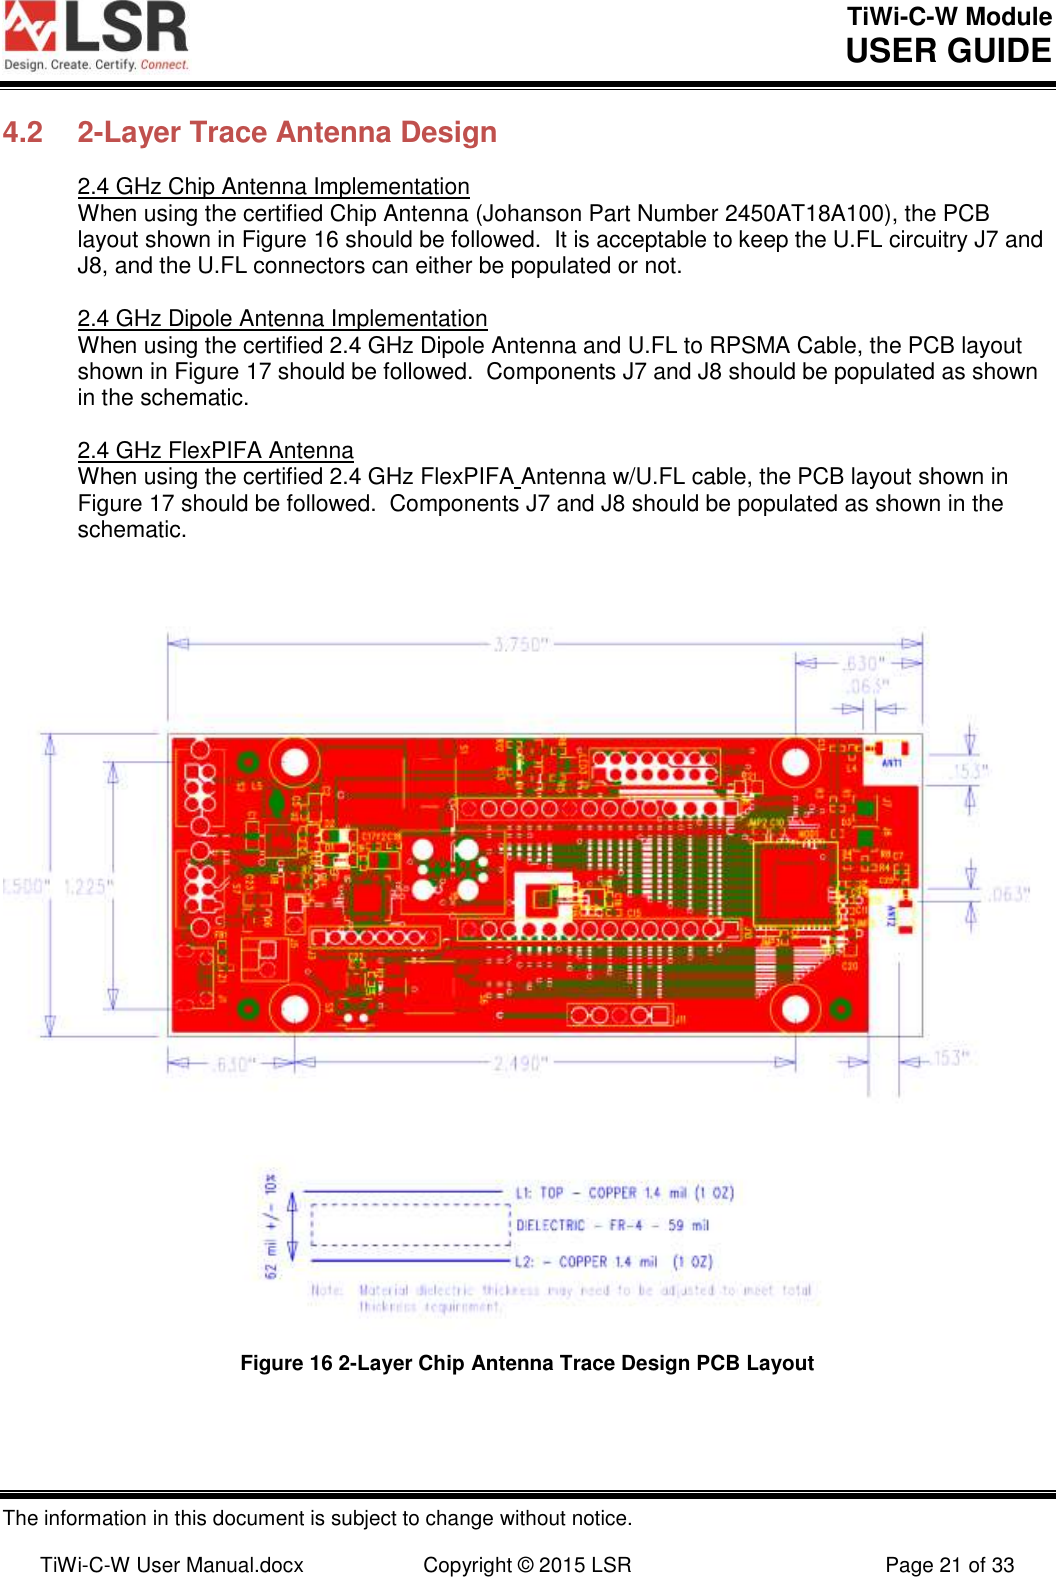 TiWi-C-W Module       USER GUIDE  The information in this document is subject to change without notice.  TiWi-C-W User Manual.docx  Copyright © 2015 LSR  Page 21 of 33 4.2  2-Layer Trace Antenna Design 2.4 GHz Chip Antenna Implementation When using the certified Chip Antenna (Johanson Part Number 2450AT18A100), the PCB layout shown in Figure 16 should be followed.  It is acceptable to keep the U.FL circuitry J7 and J8, and the U.FL connectors can either be populated or not.  2.4 GHz Dipole Antenna Implementation When using the certified 2.4 GHz Dipole Antenna and U.FL to RPSMA Cable, the PCB layout shown in Figure 17 should be followed.  Components J7 and J8 should be populated as shown in the schematic.  2.4 GHz FlexPIFA Antenna When using the certified 2.4 GHz FlexPIFA Antenna w/U.FL cable, the PCB layout shown in Figure 17 should be followed.  Components J7 and J8 should be populated as shown in the schematic.                                  Figure 16 2-Layer Chip Antenna Trace Design PCB Layout 